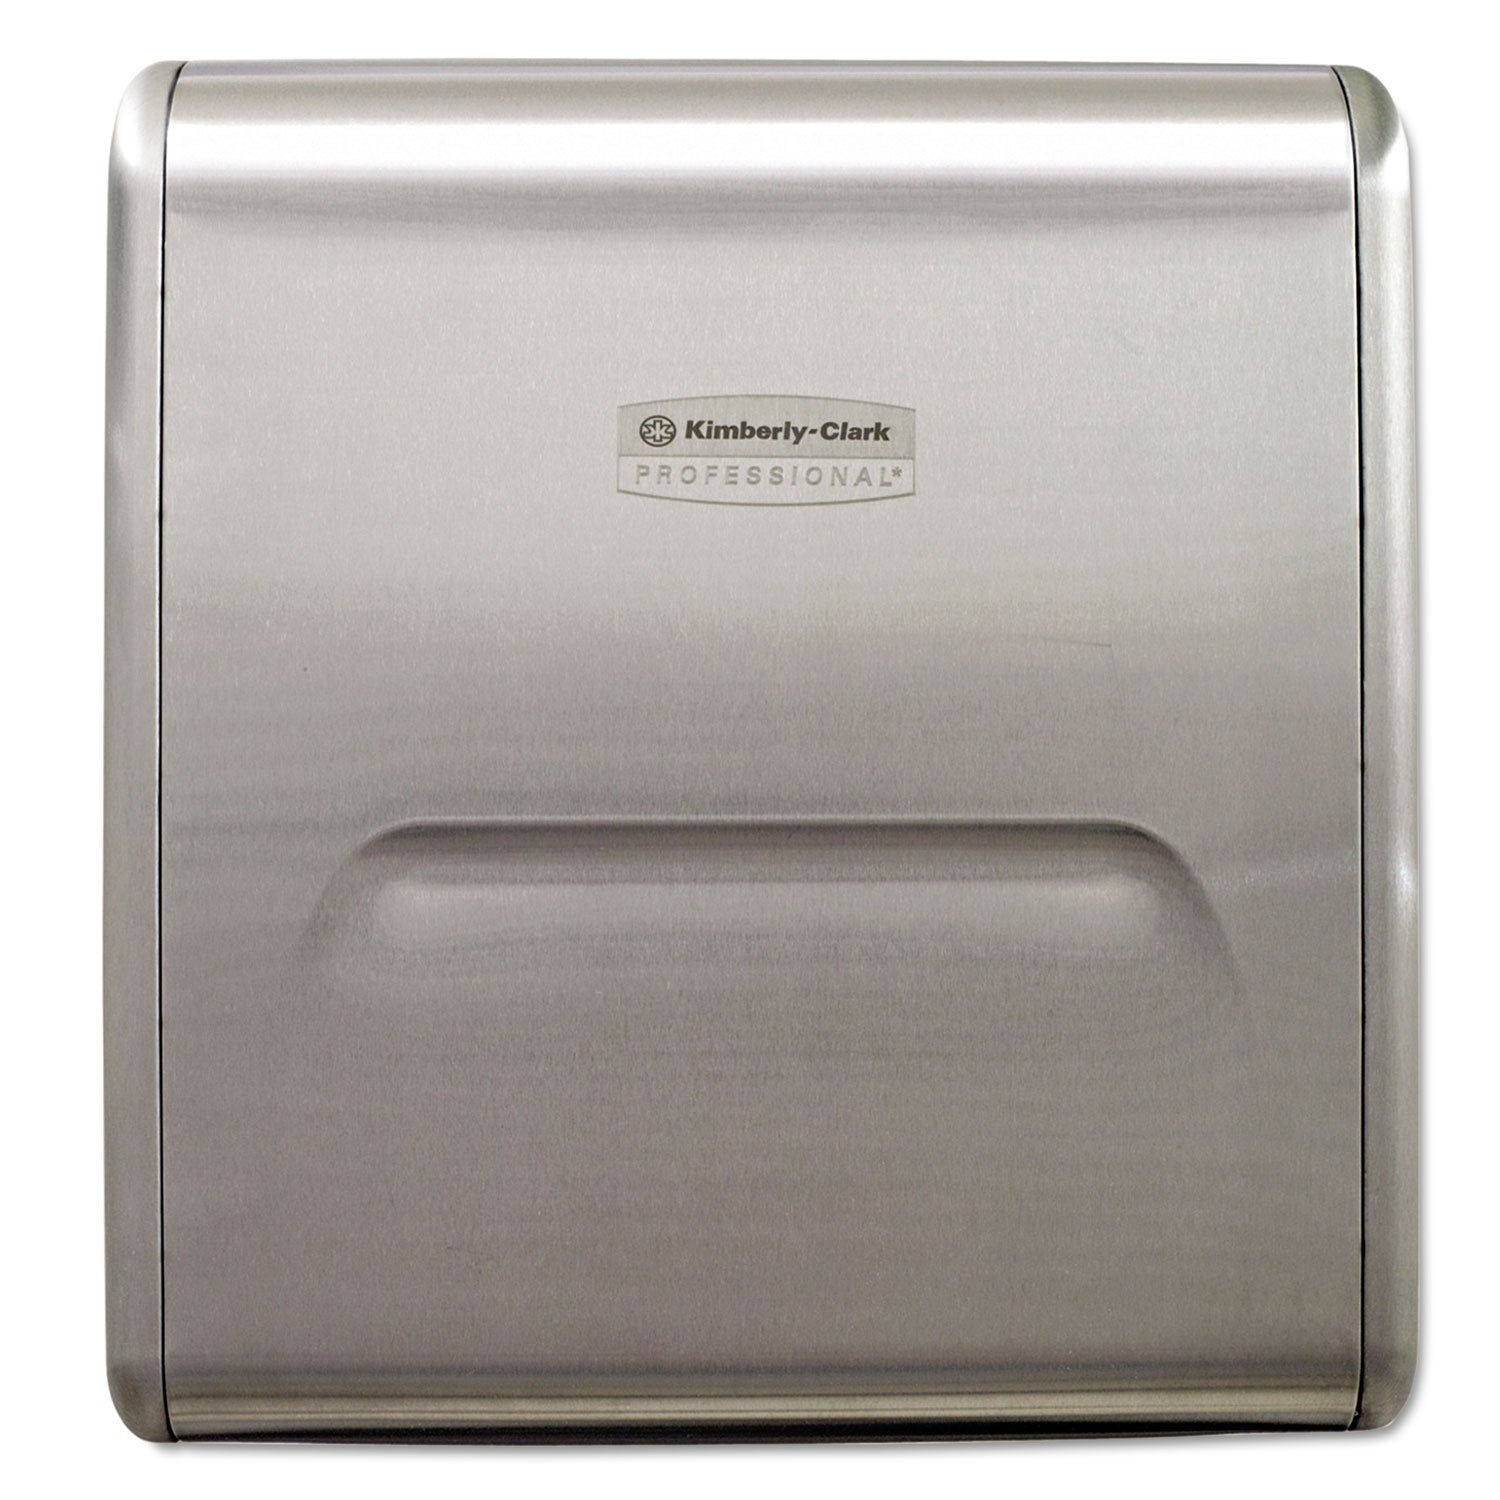 Kimberly-Clark Mod Stainless Steel Recessed Dispenser Housing, Stainless Steel, 11.13X4X15.37 - KCC31501